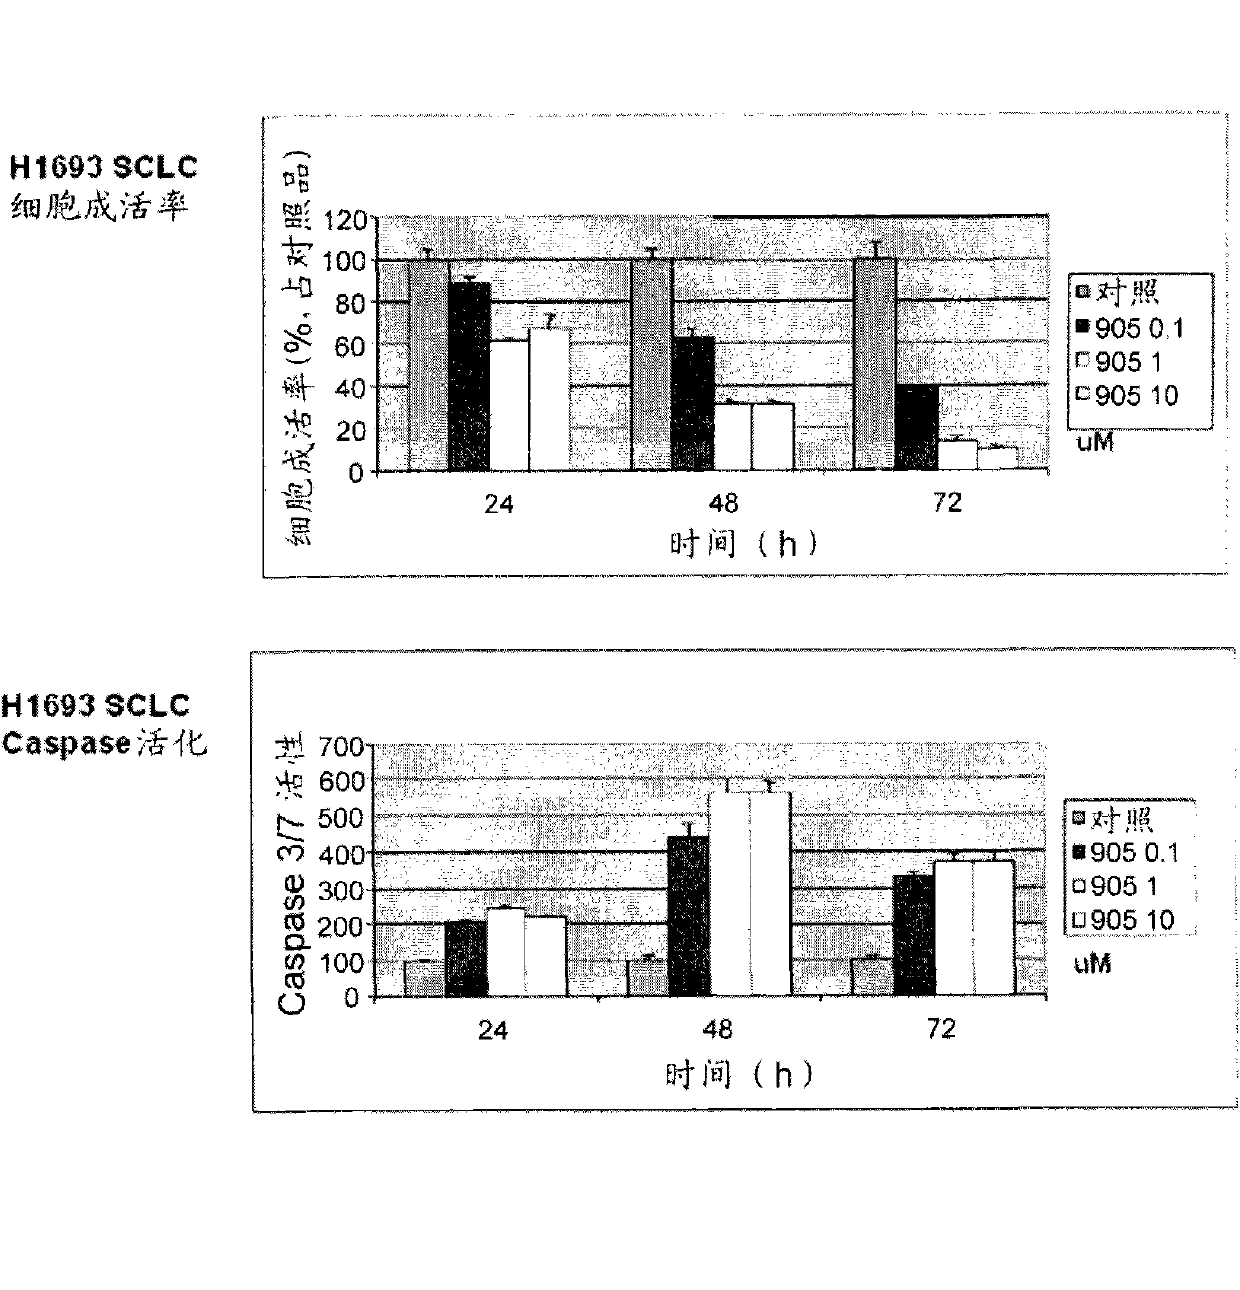 Water soluble camptothecin derivative and medicinal composition containing same